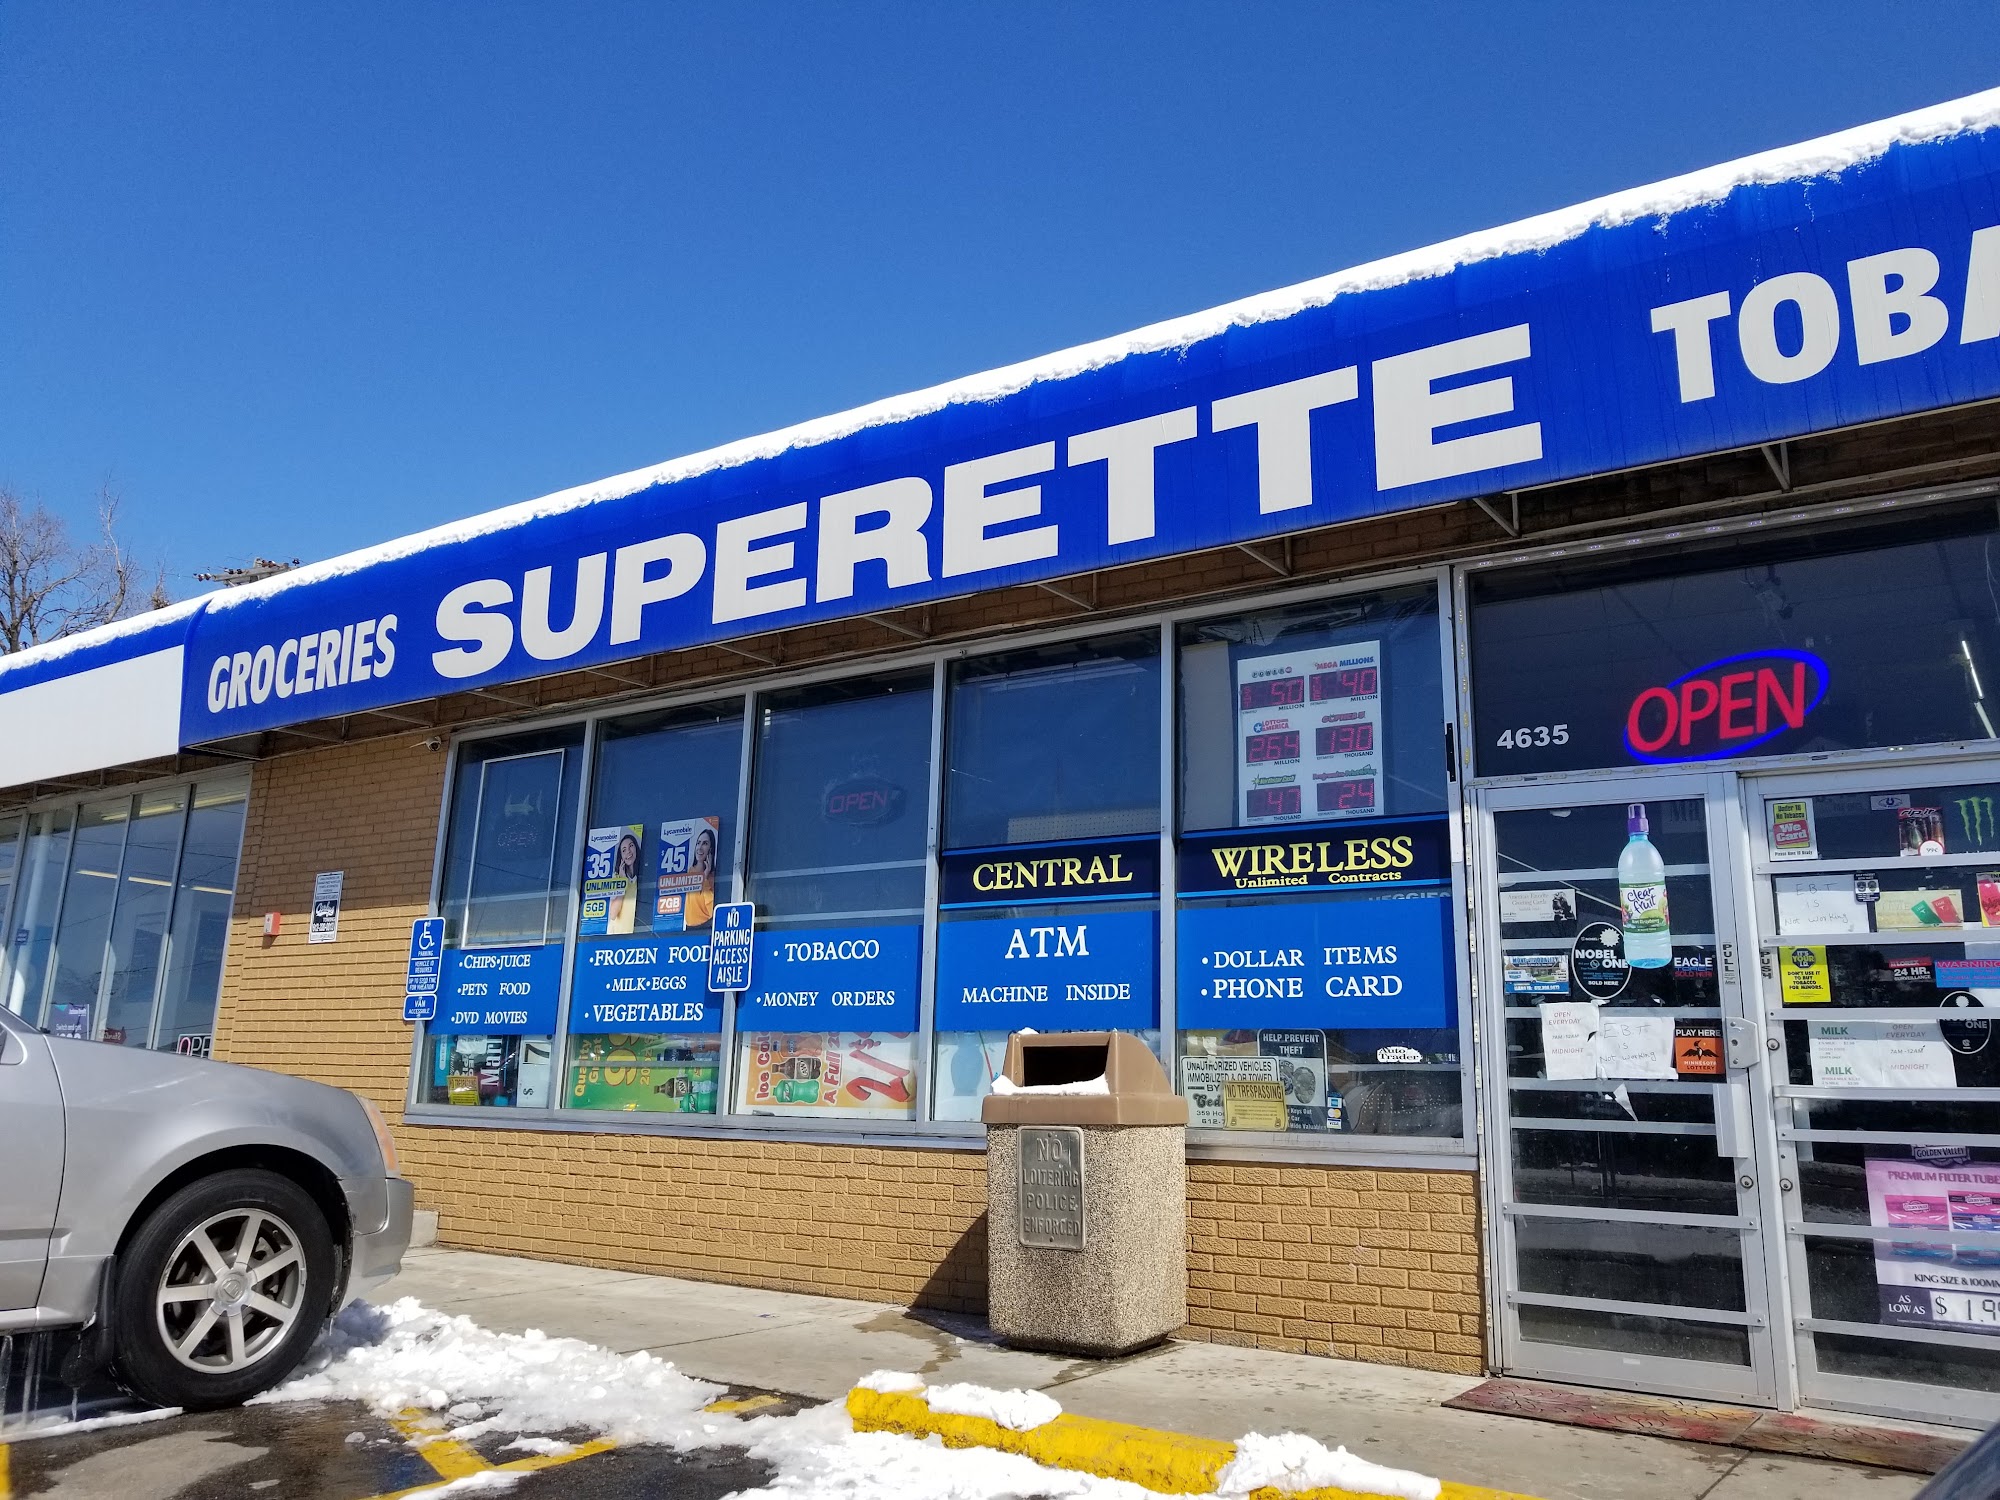 Central Superette Grocery & Tobacco